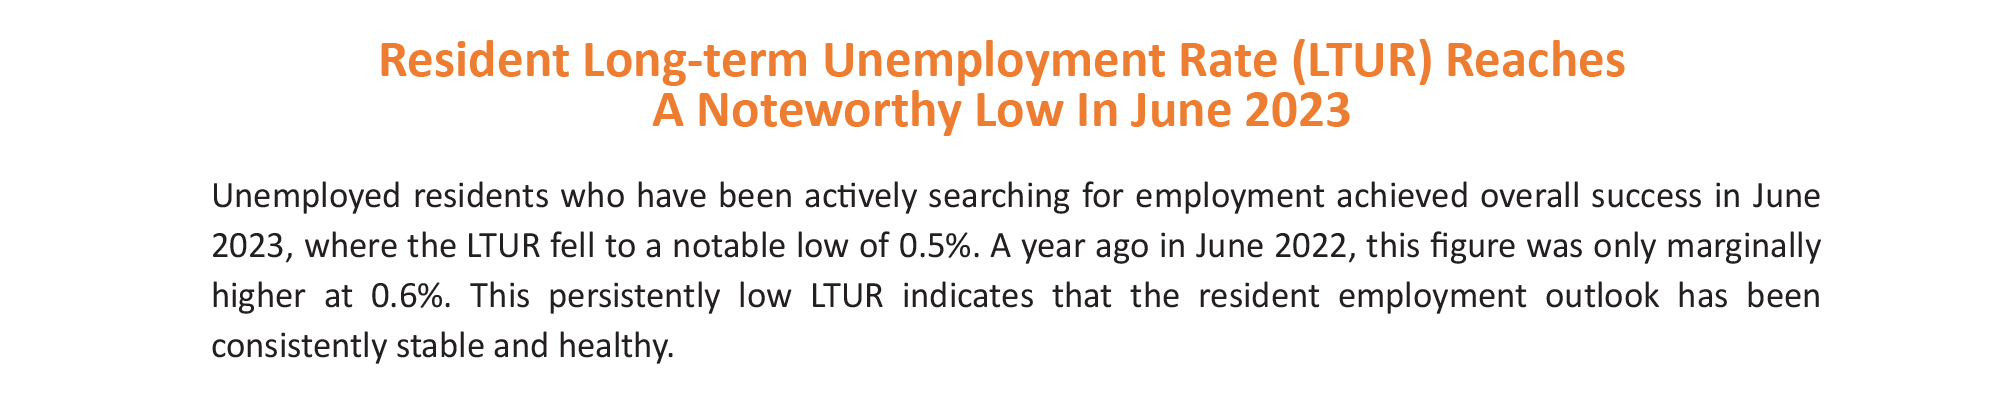 Resident Long-term Unemployment Rate (LTUR) Reaches A Noteworthy Low in June 2023